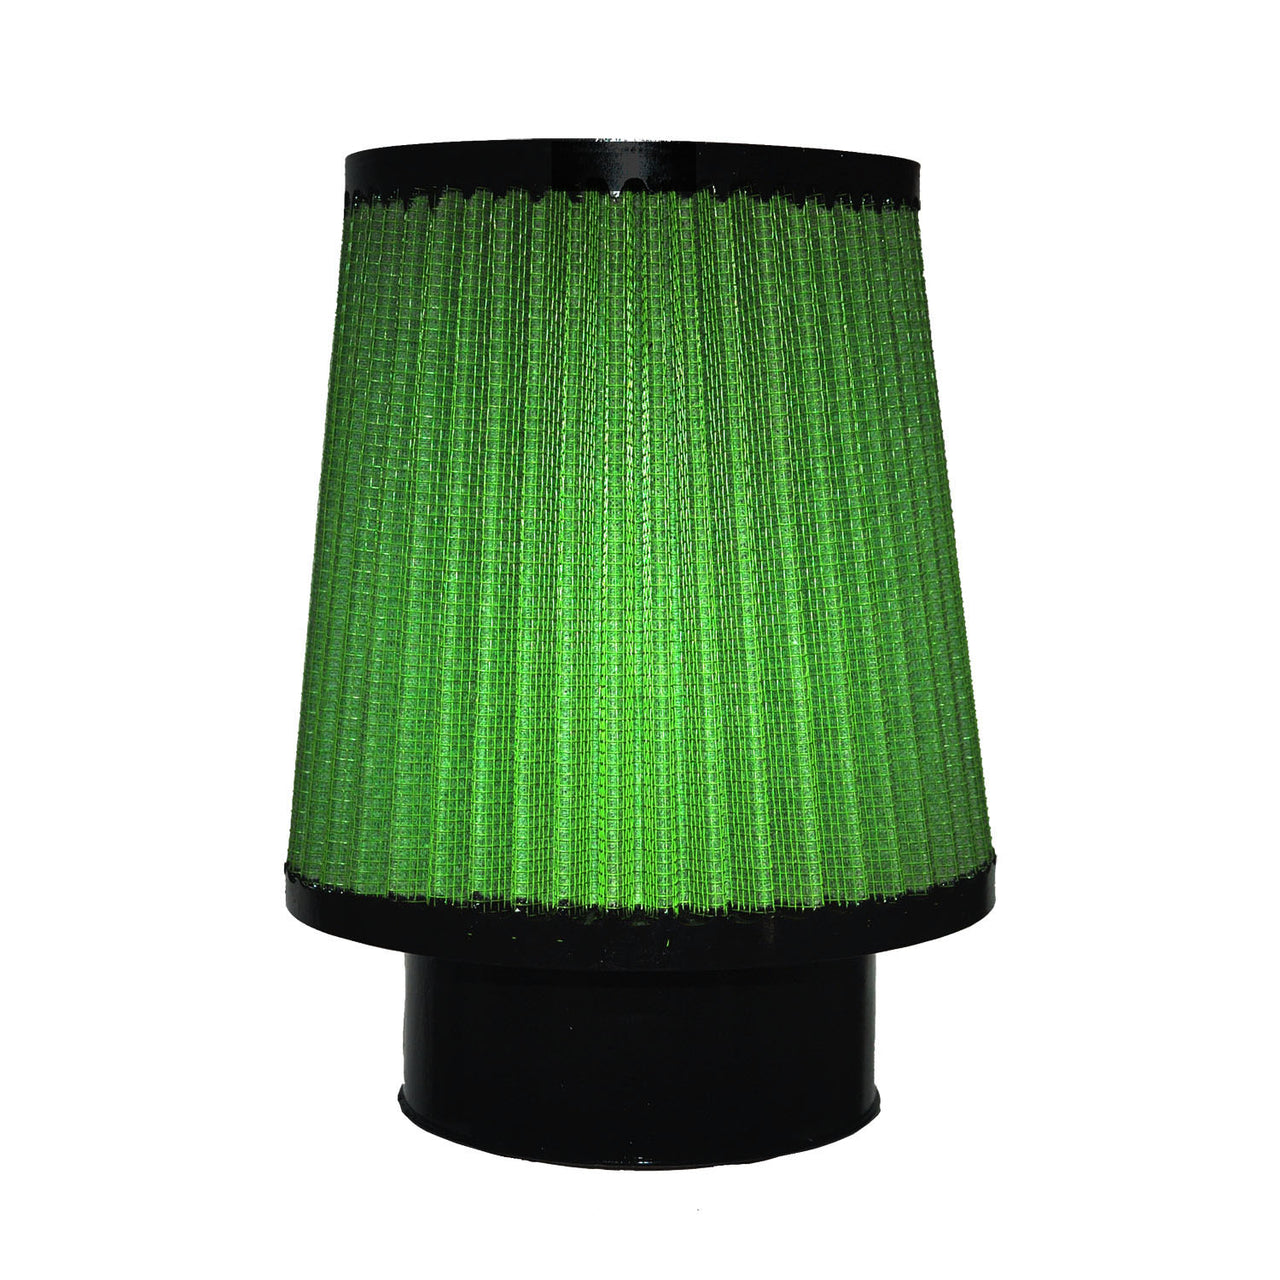 Green Filter Cone Filter - ID 3.5in. / Base 6in. / Top 4.75in. / H 6in.